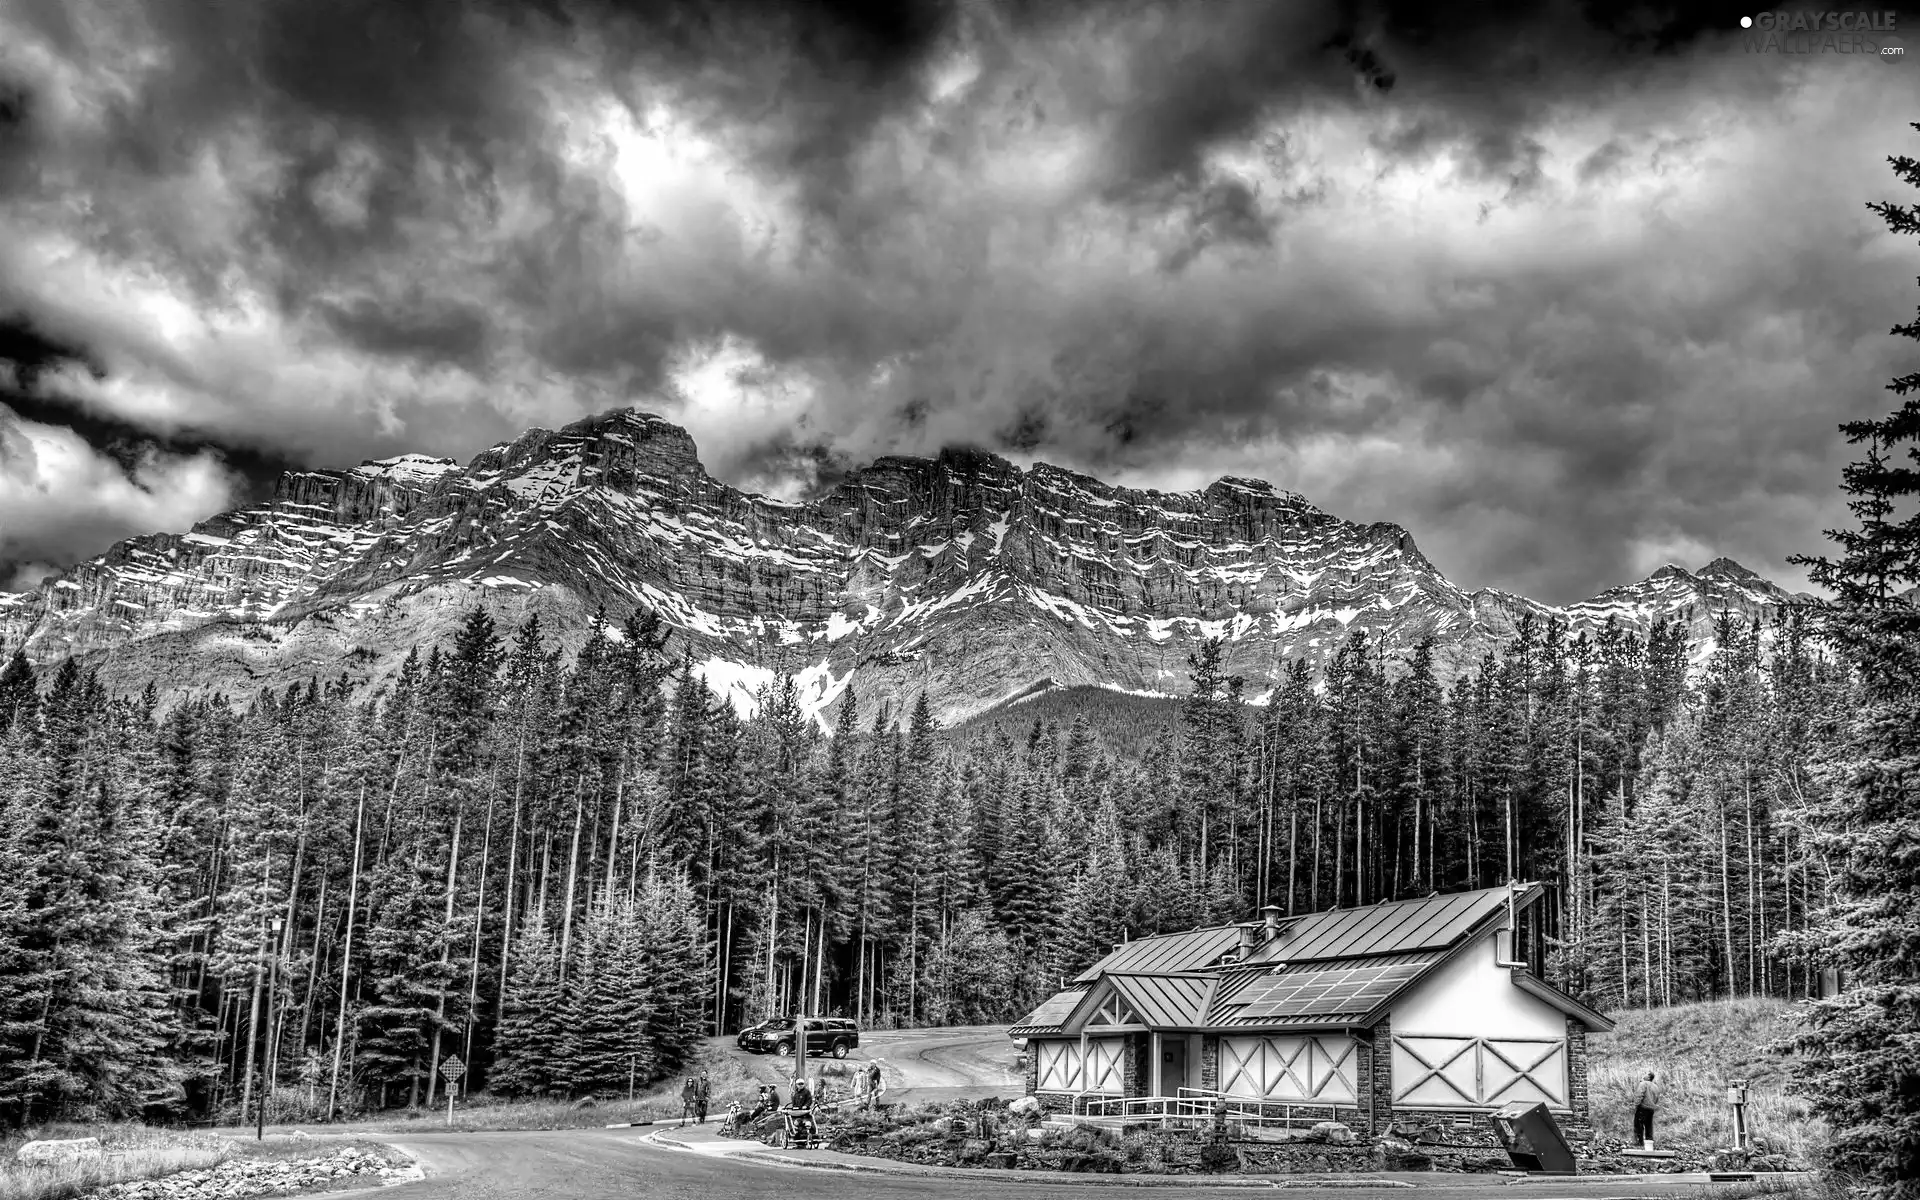 Mountains, Mount Rundle, clouds, forest, house, Banff National Park, Canada, Way